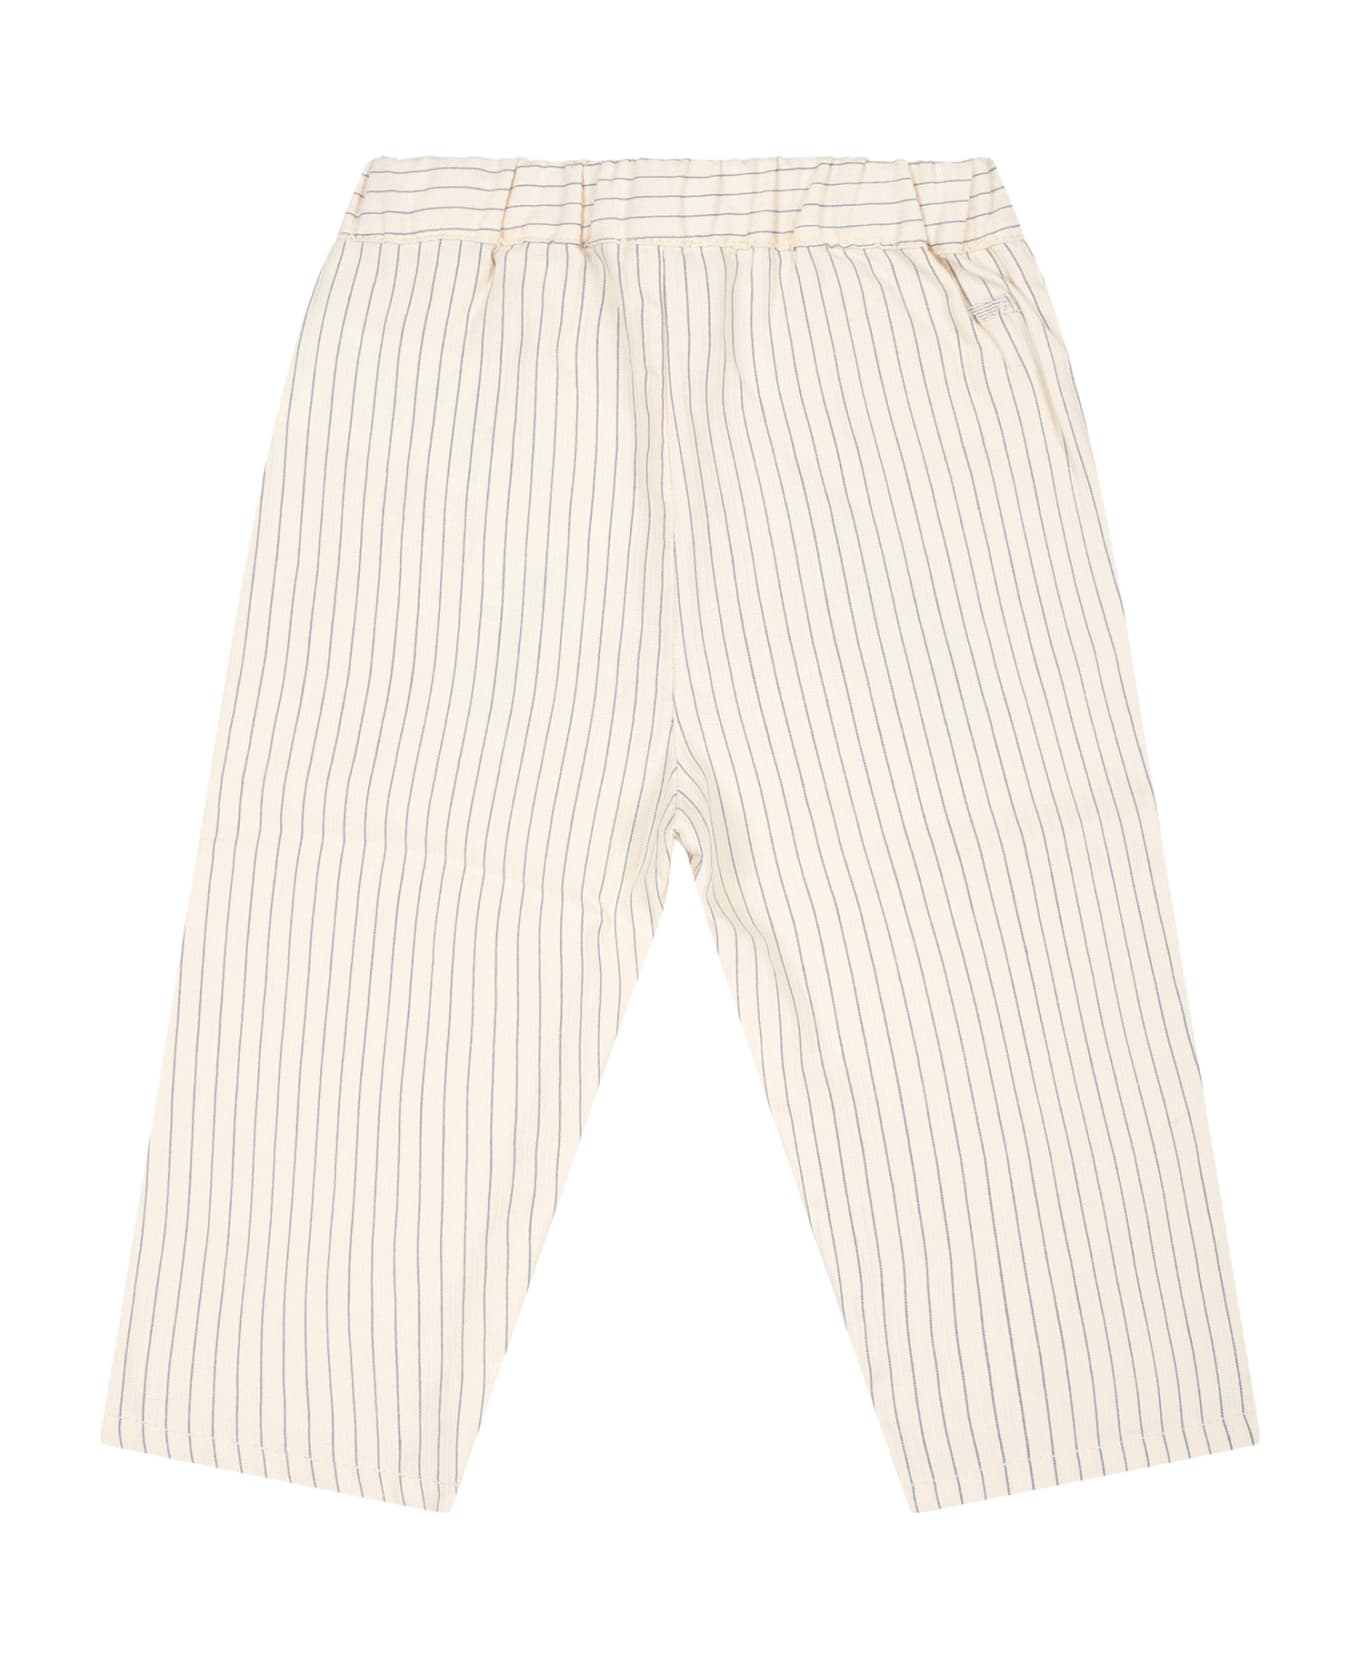 Emporio Armani Ivory Trousers For Baby Boy - Ivory ボトムス